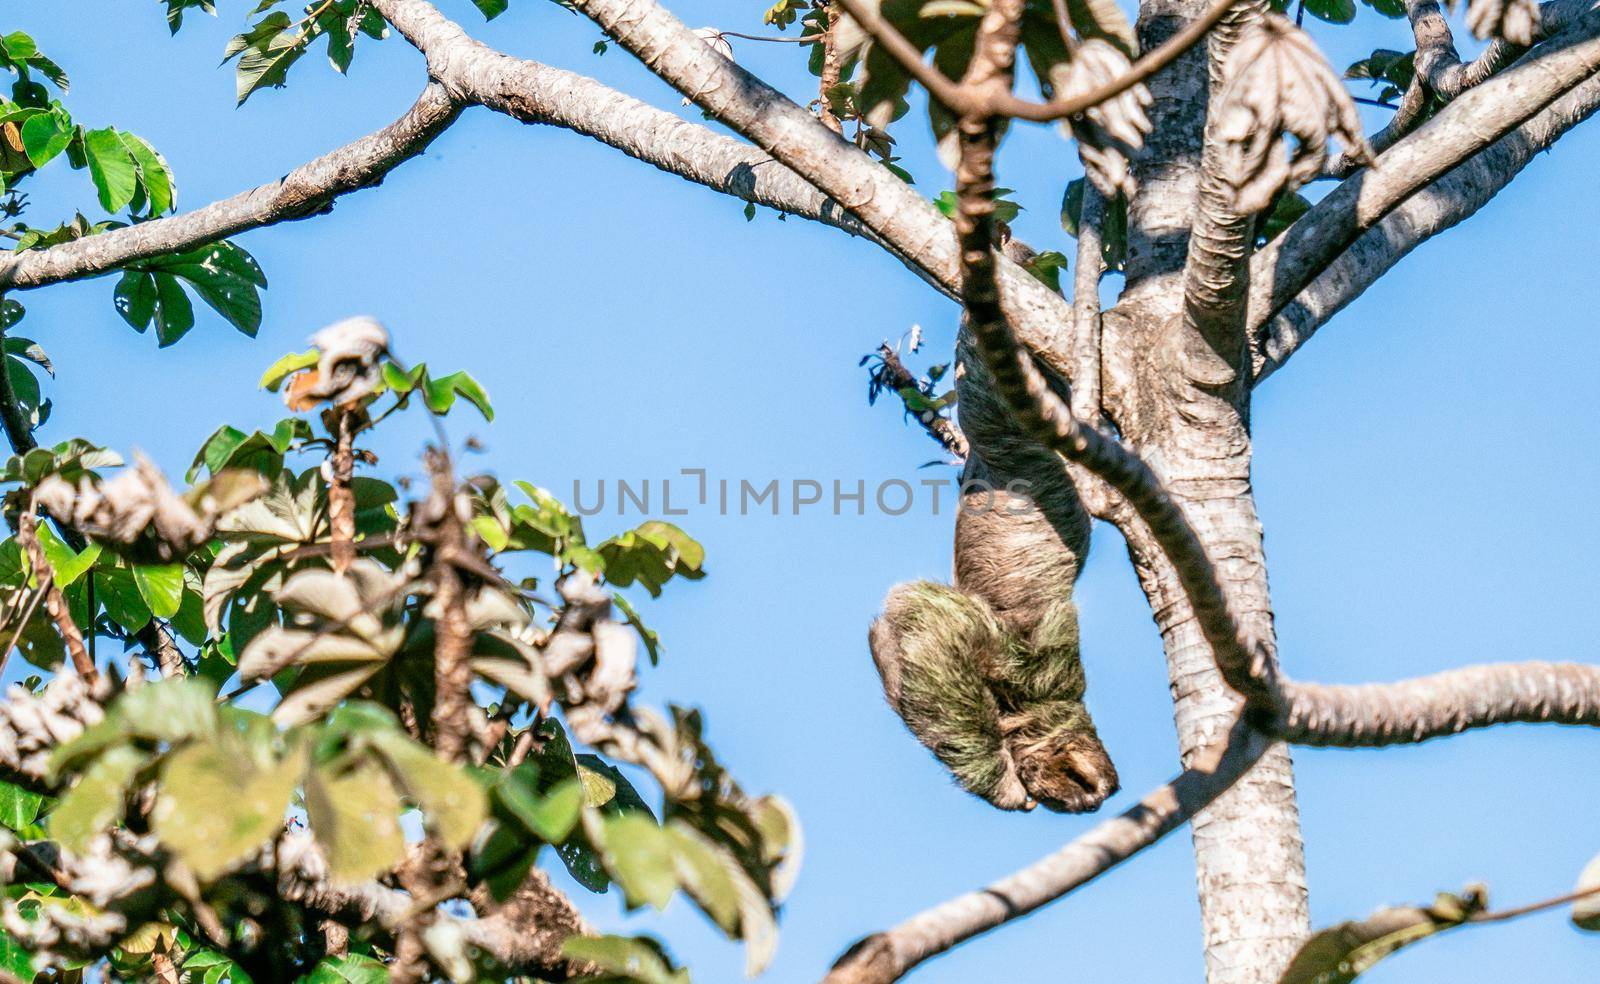 Cute Sloth on the tree - Costa rica. High quality photo